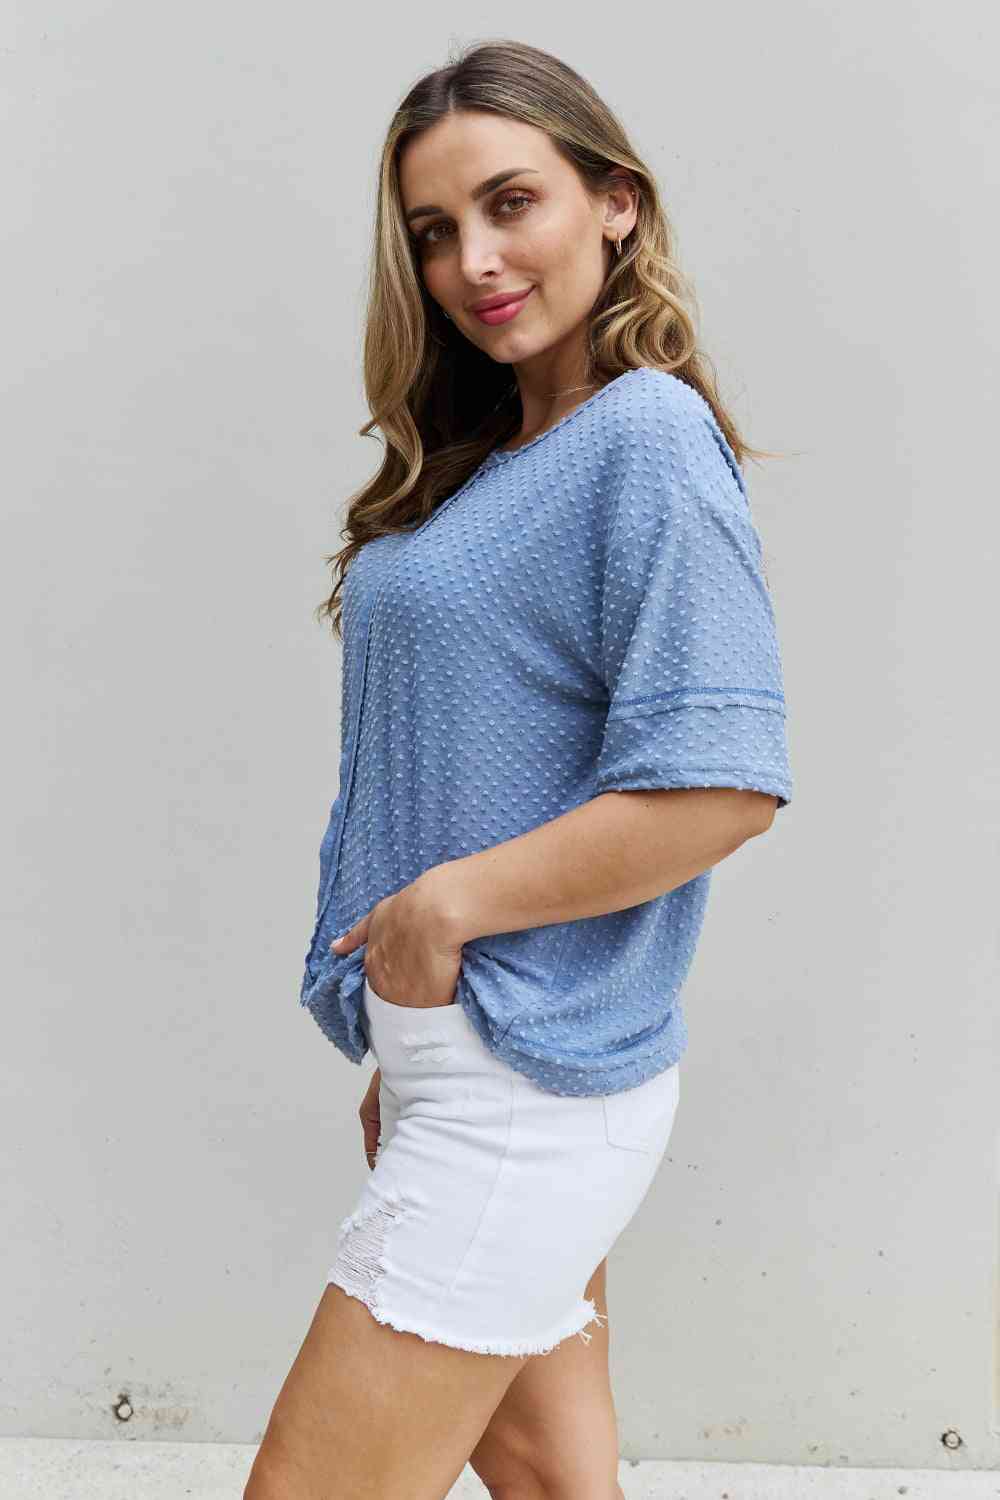 Cater 2 You Swiss Dot Reverse Stitch Short Sleeve Top - Camis & Tops - Shirts & Tops - 3 - 2024